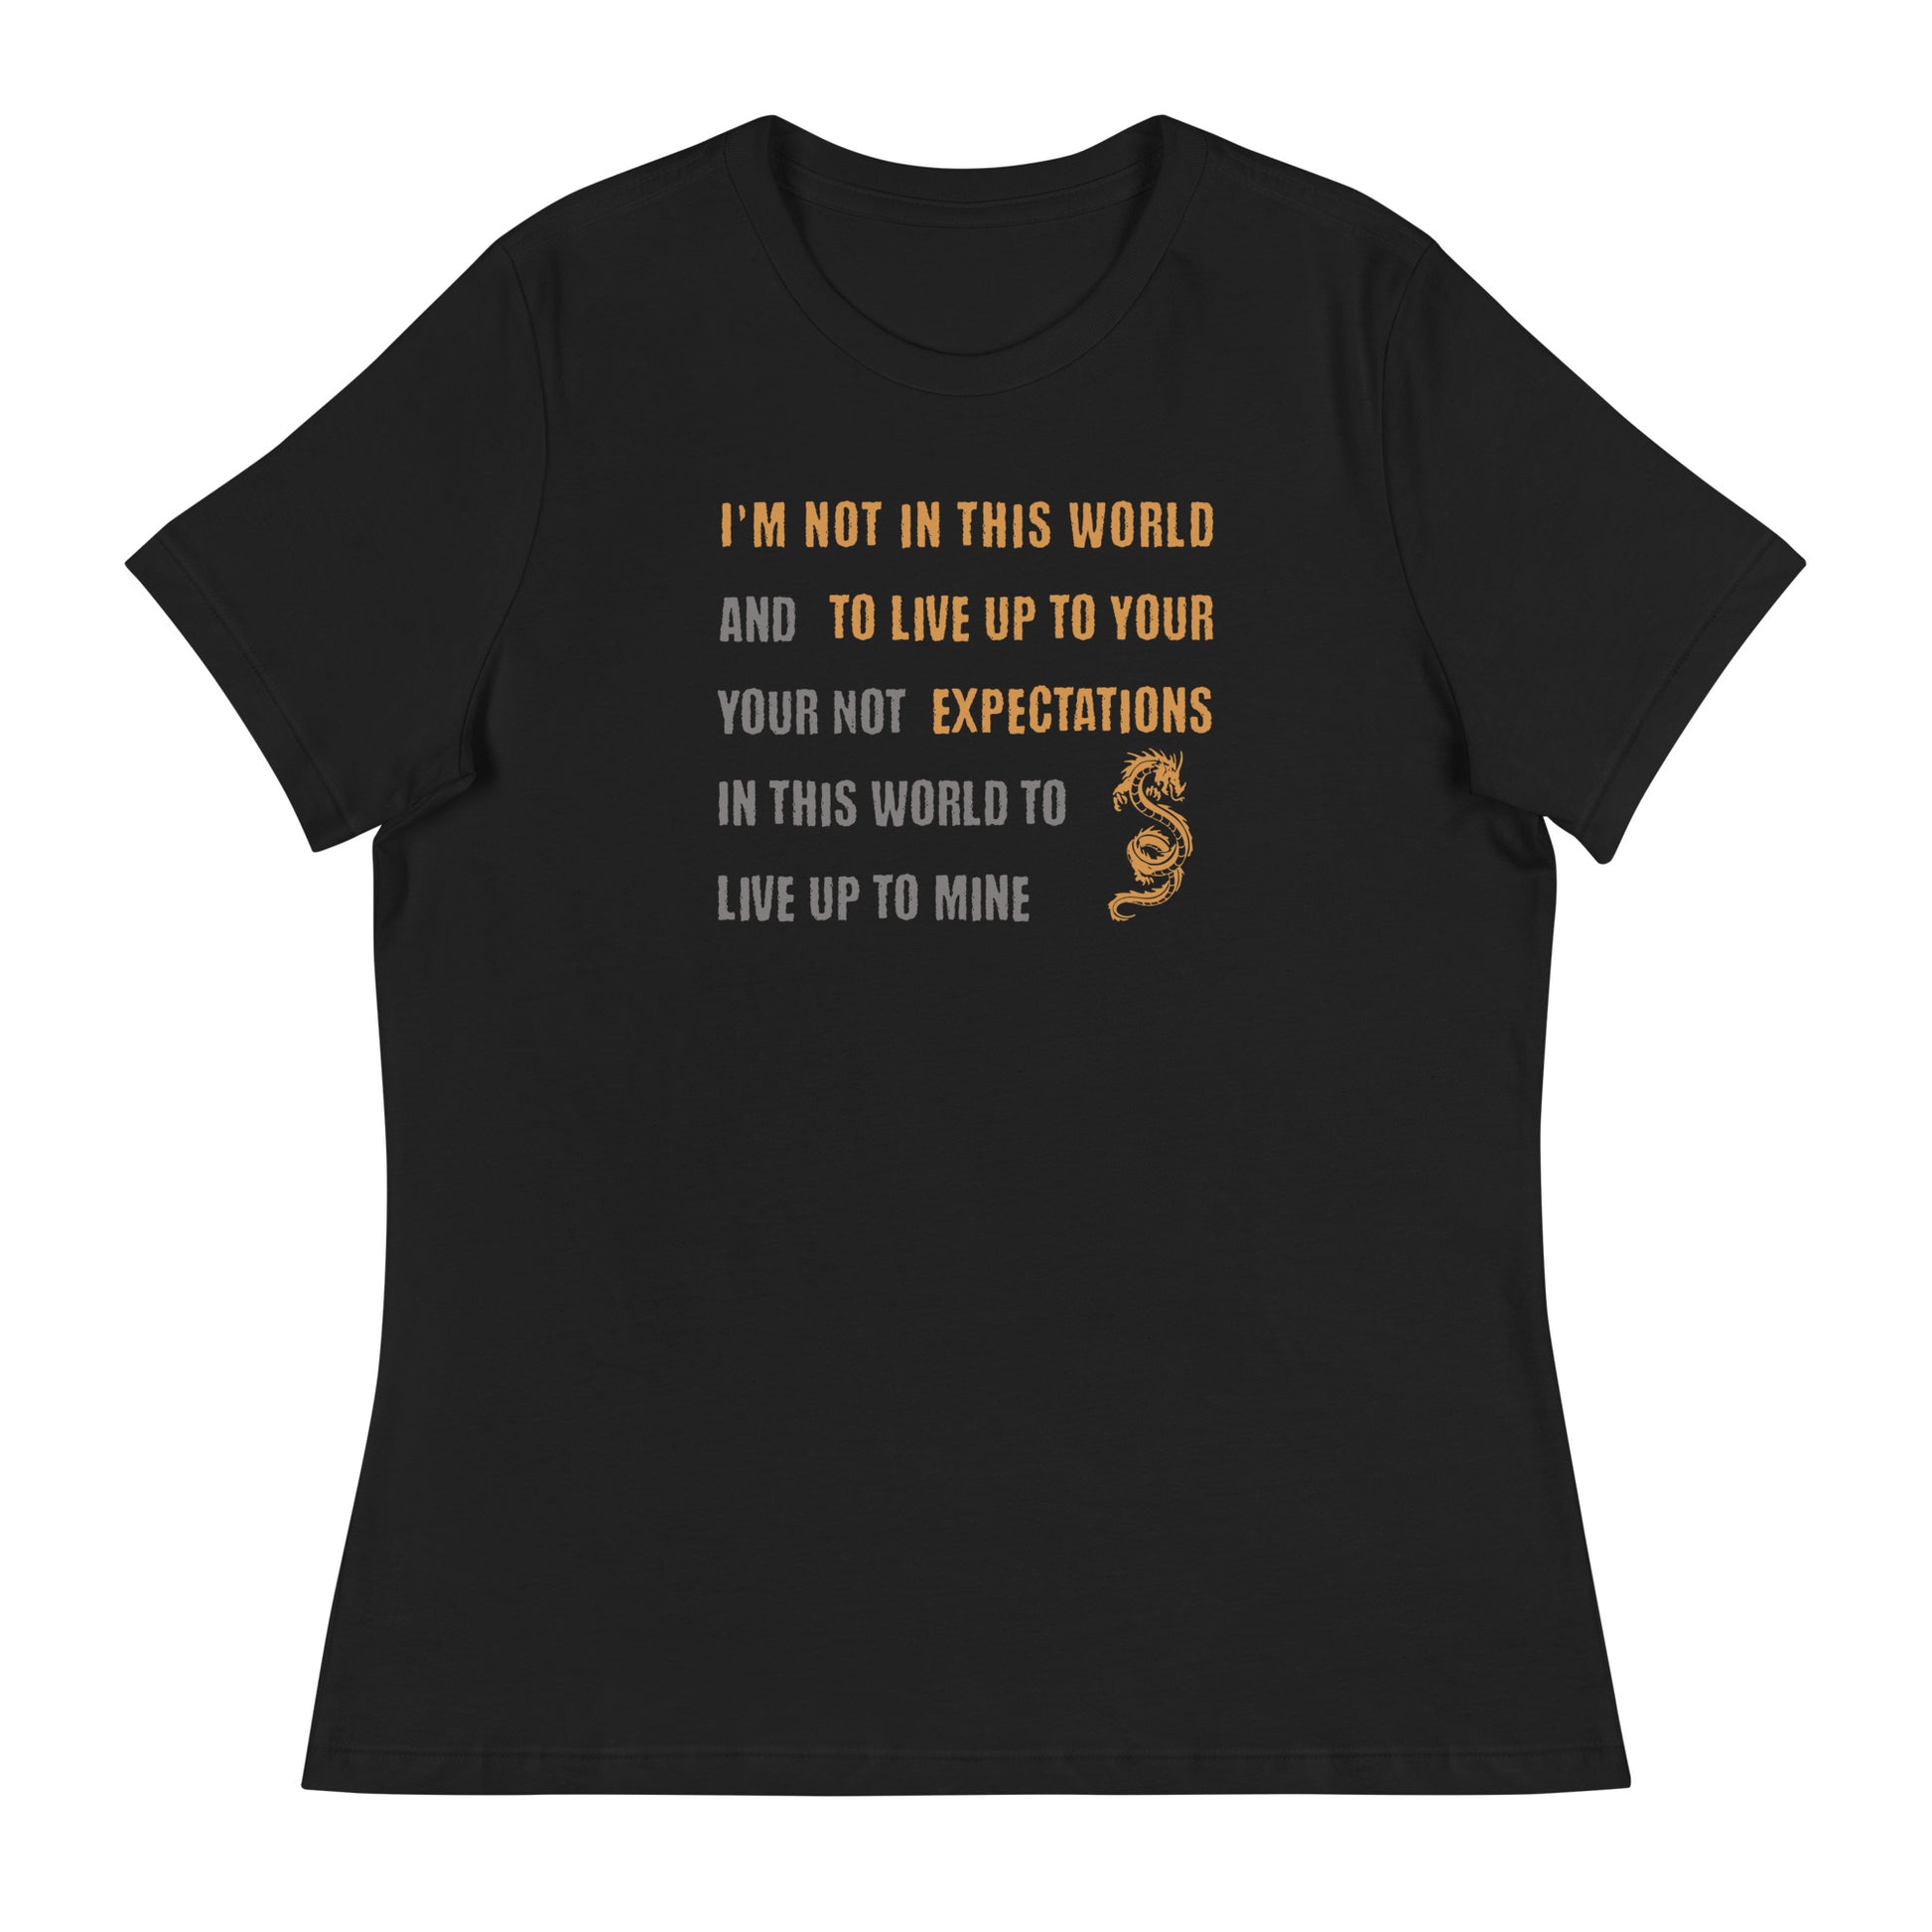 I'm Not Here To Live Up To Your Expectations Women's T-Shirt Black